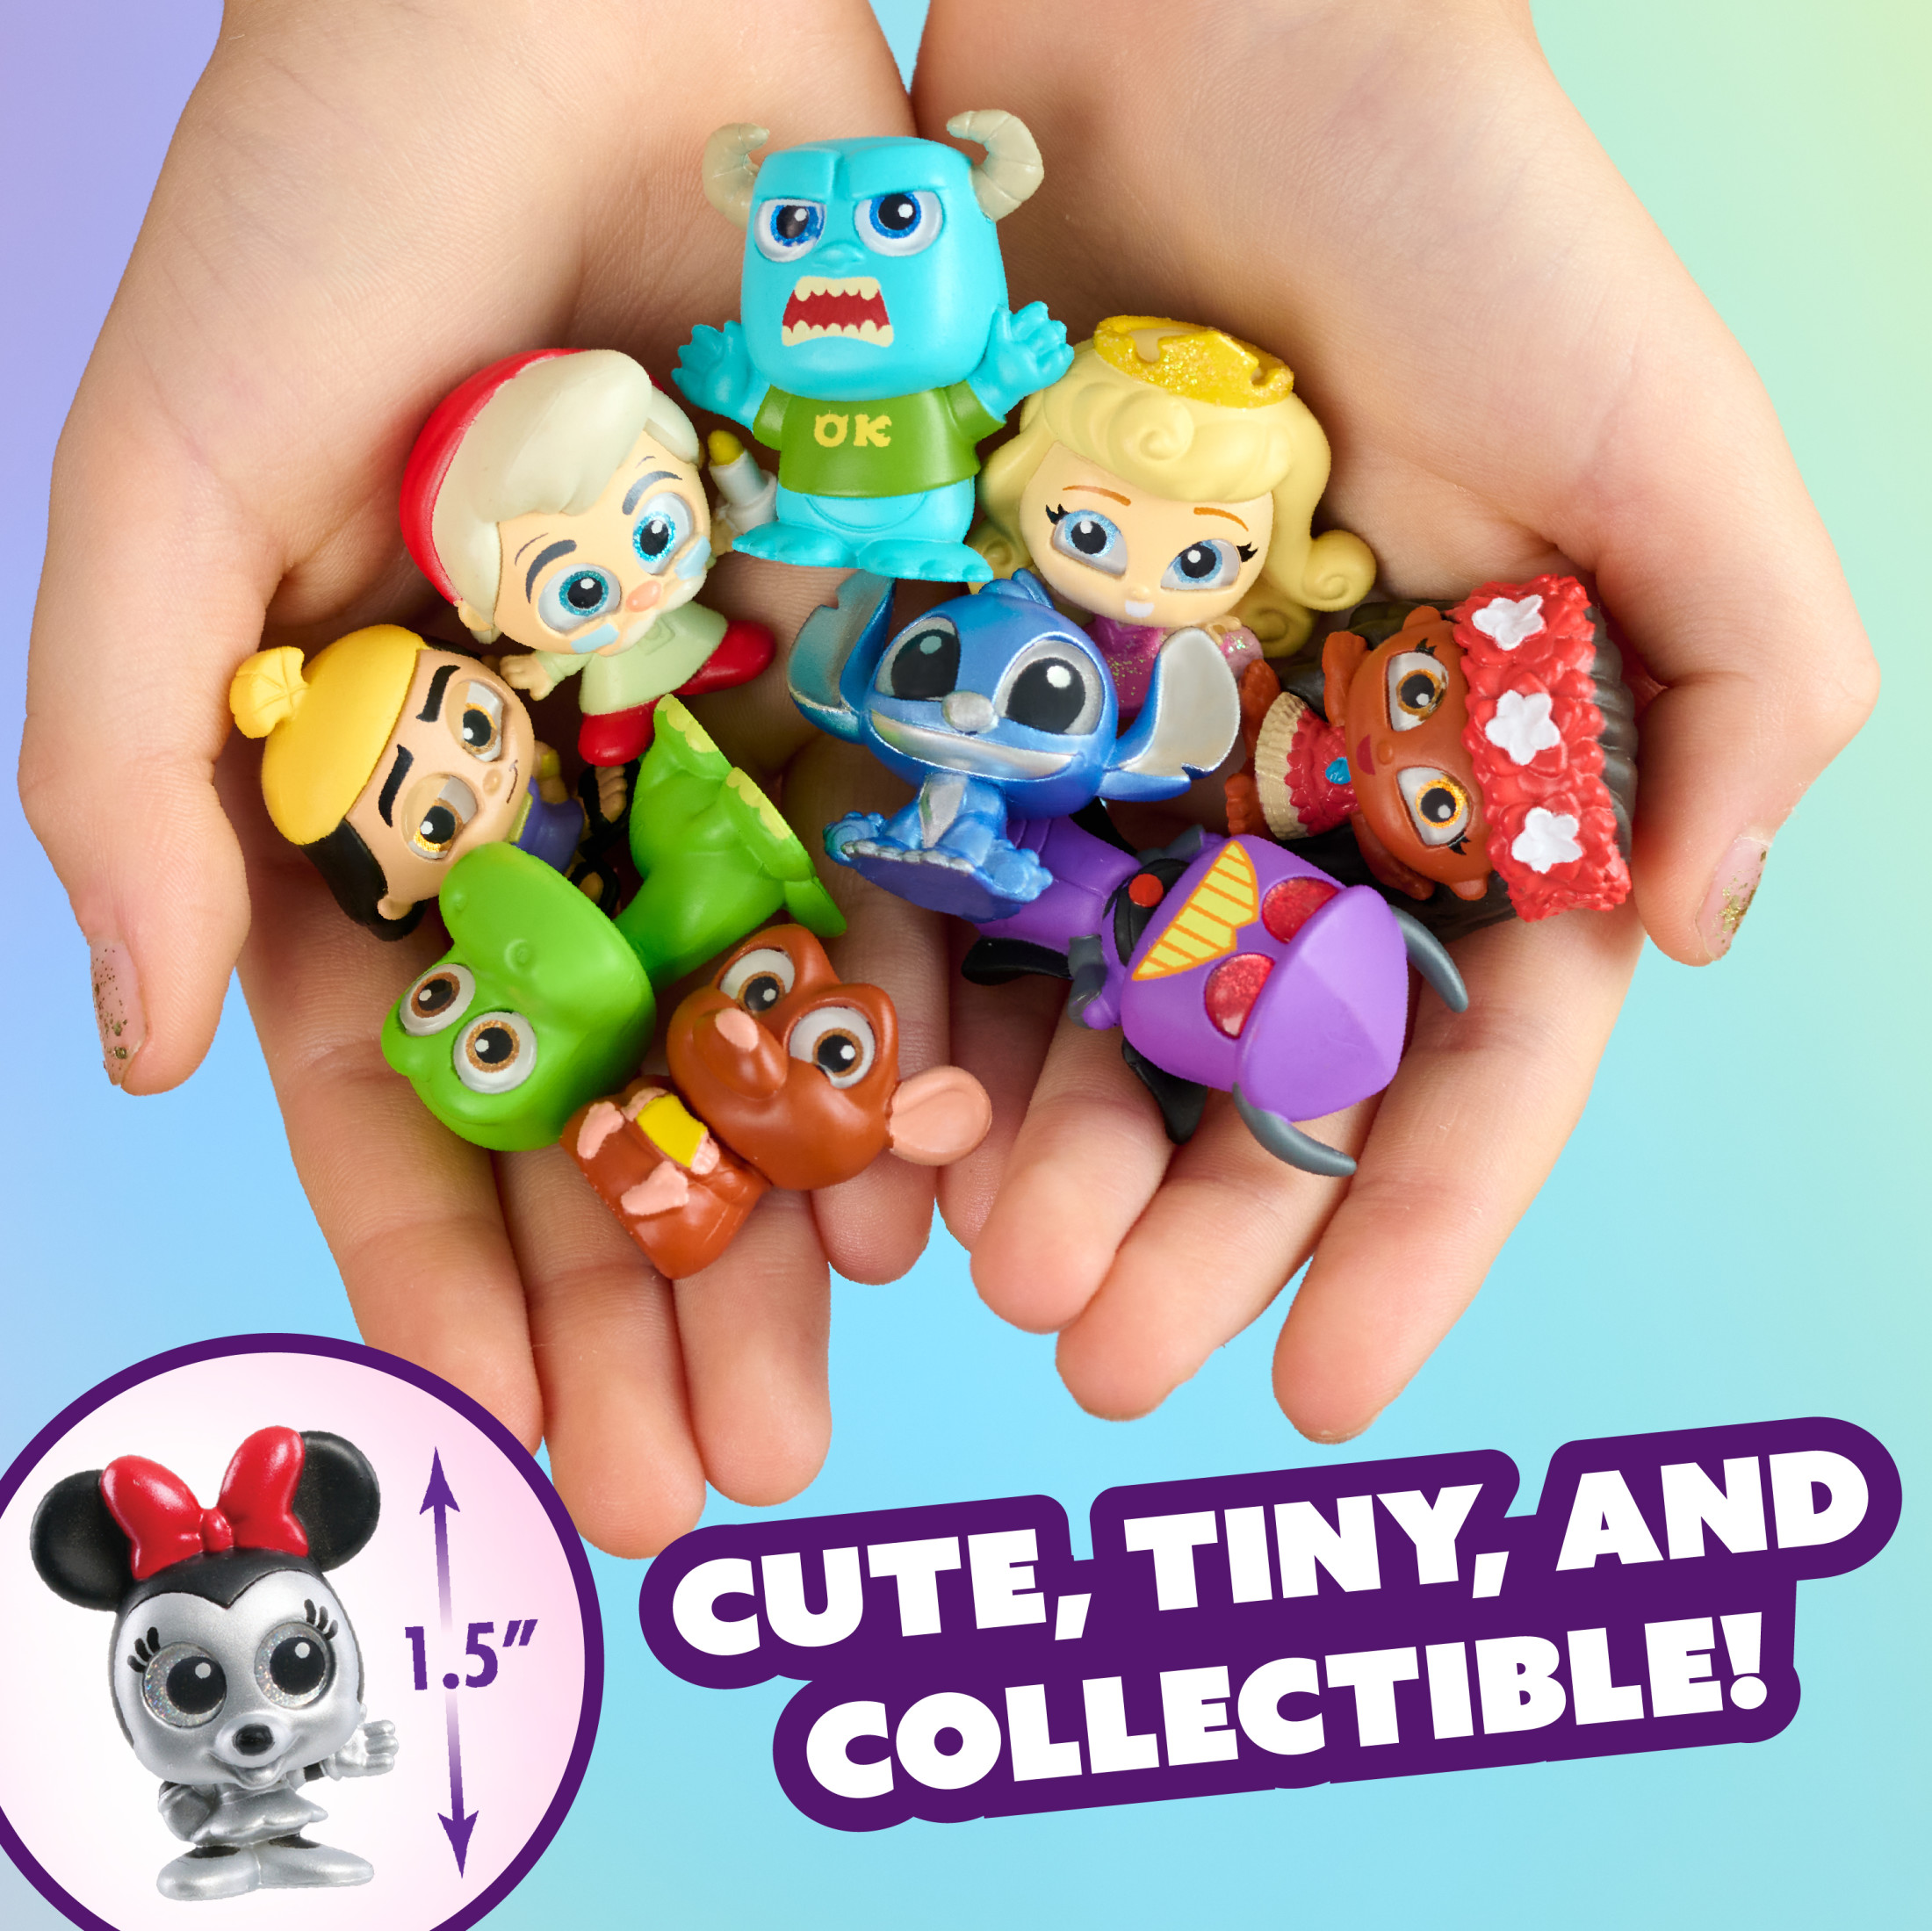 Disney Doorables NEW Mini Peek Series 10, Collectible Blind Bag Figures, Styles May Vary, Kids Toys for Ages 5 up - image 5 of 7